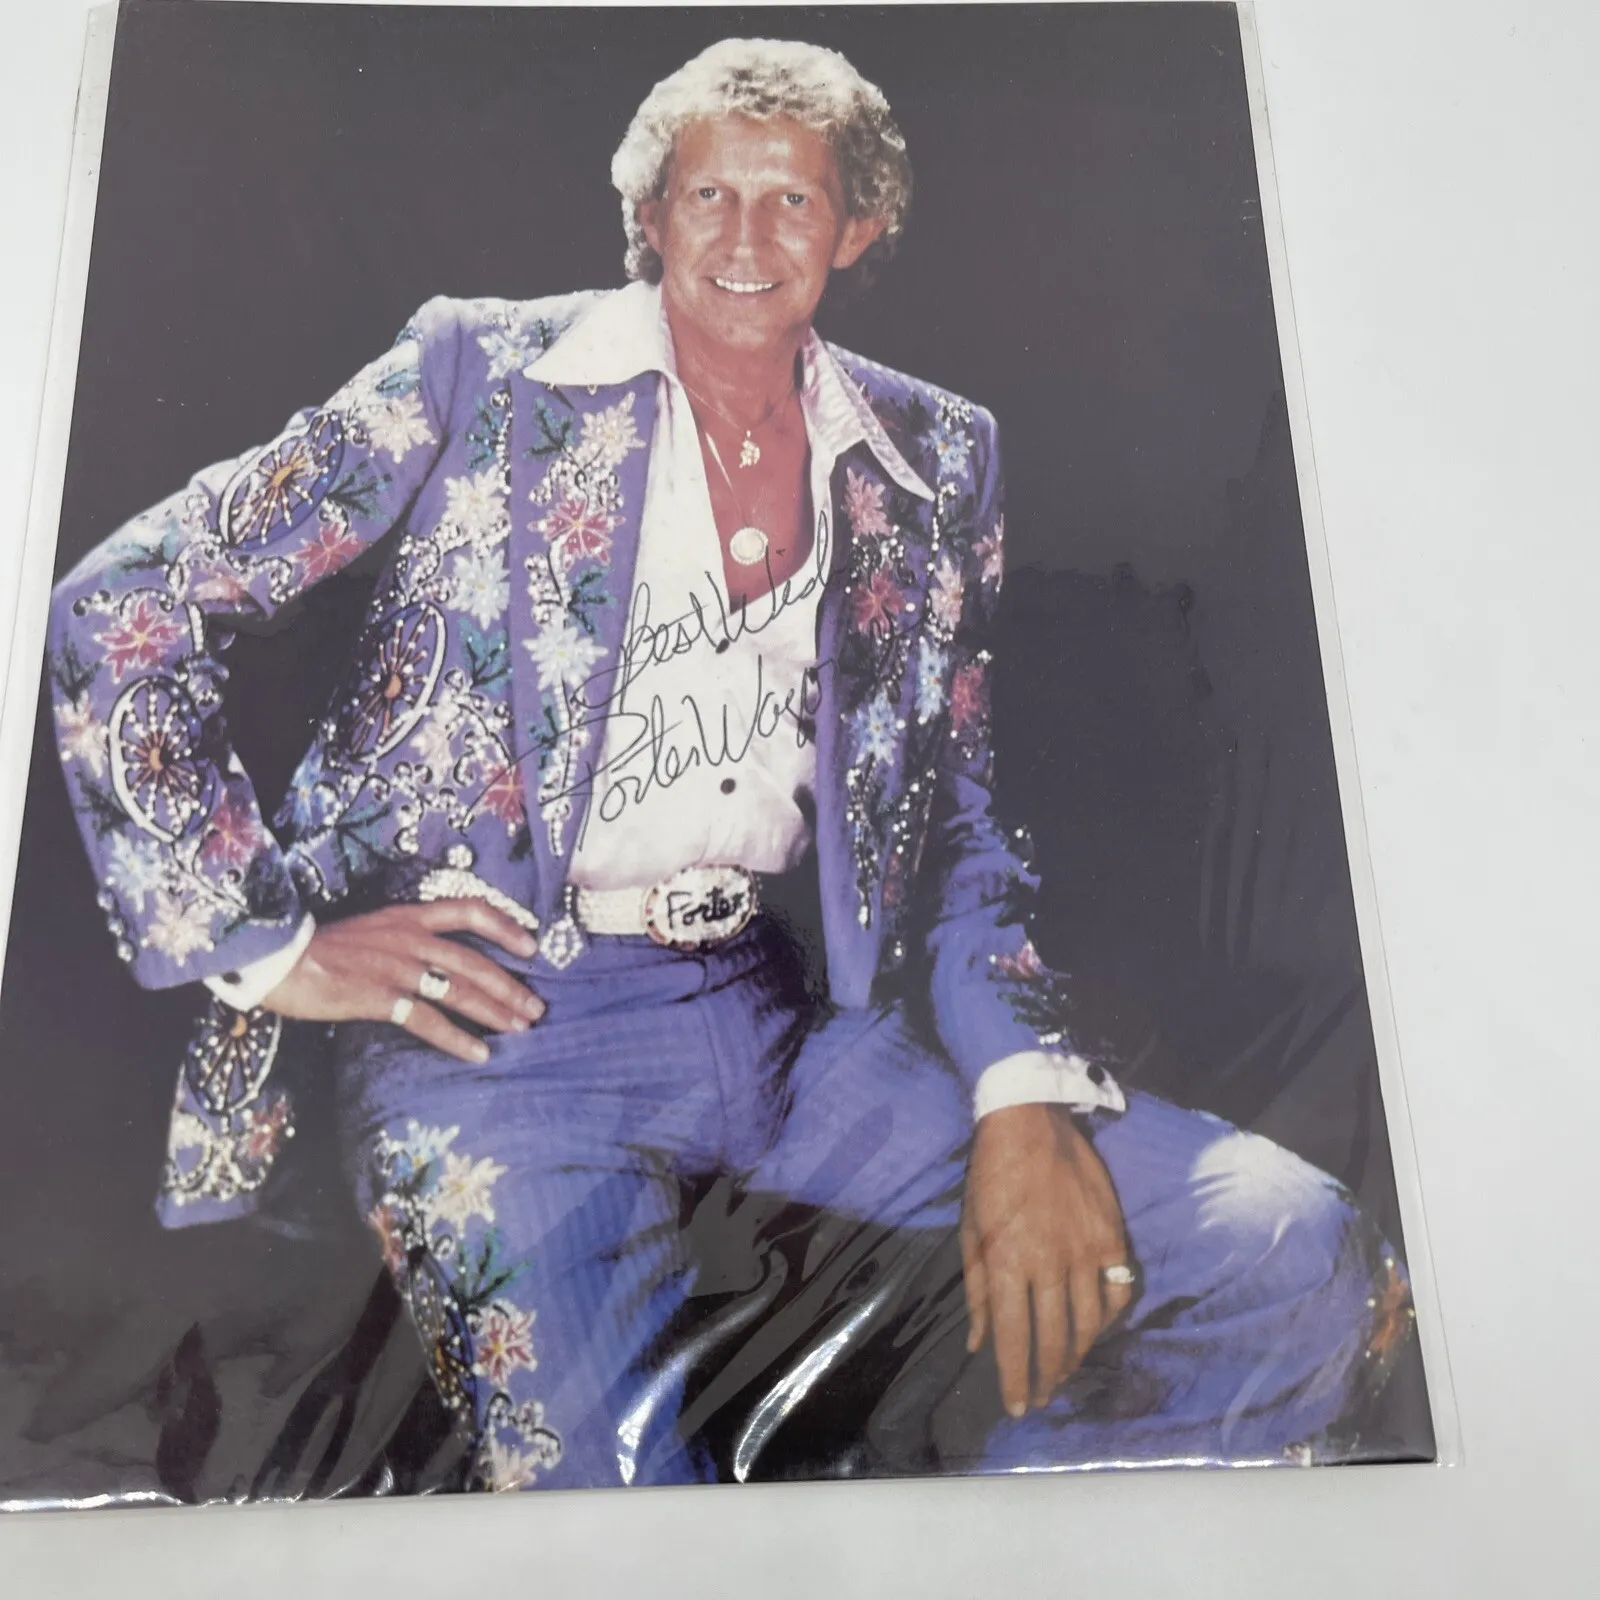 PORTER WAGONER GRAND OLD OPRY COUNTRY MUSIC SINGER SIGNED PHOTO AUTOGRAPH